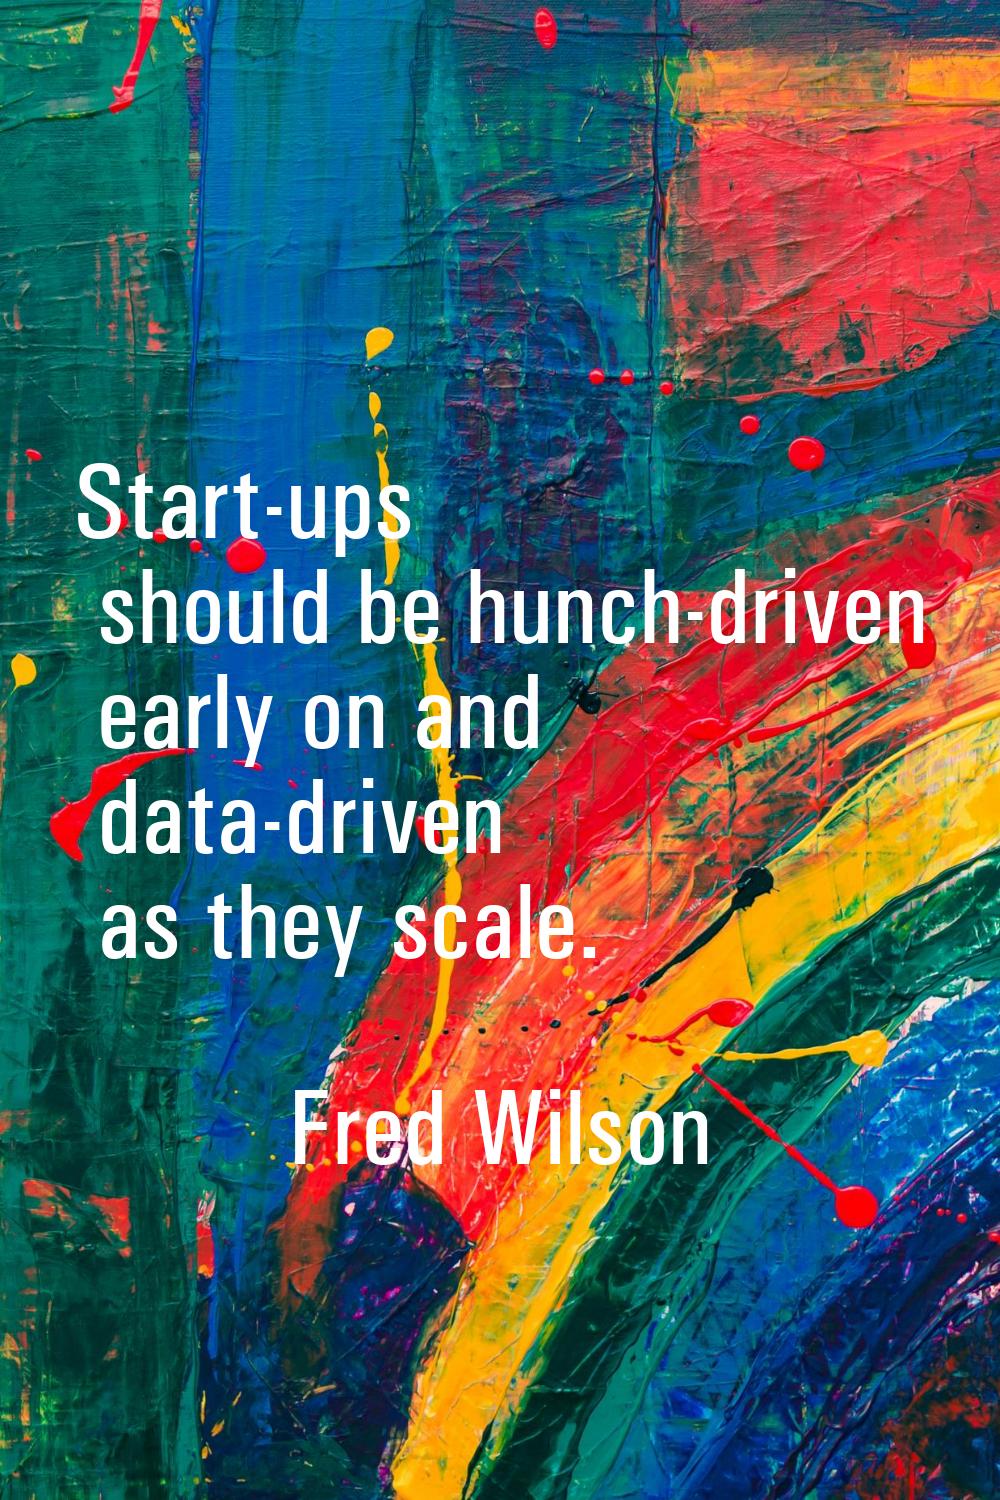 Start-ups should be hunch-driven early on and data-driven as they scale.